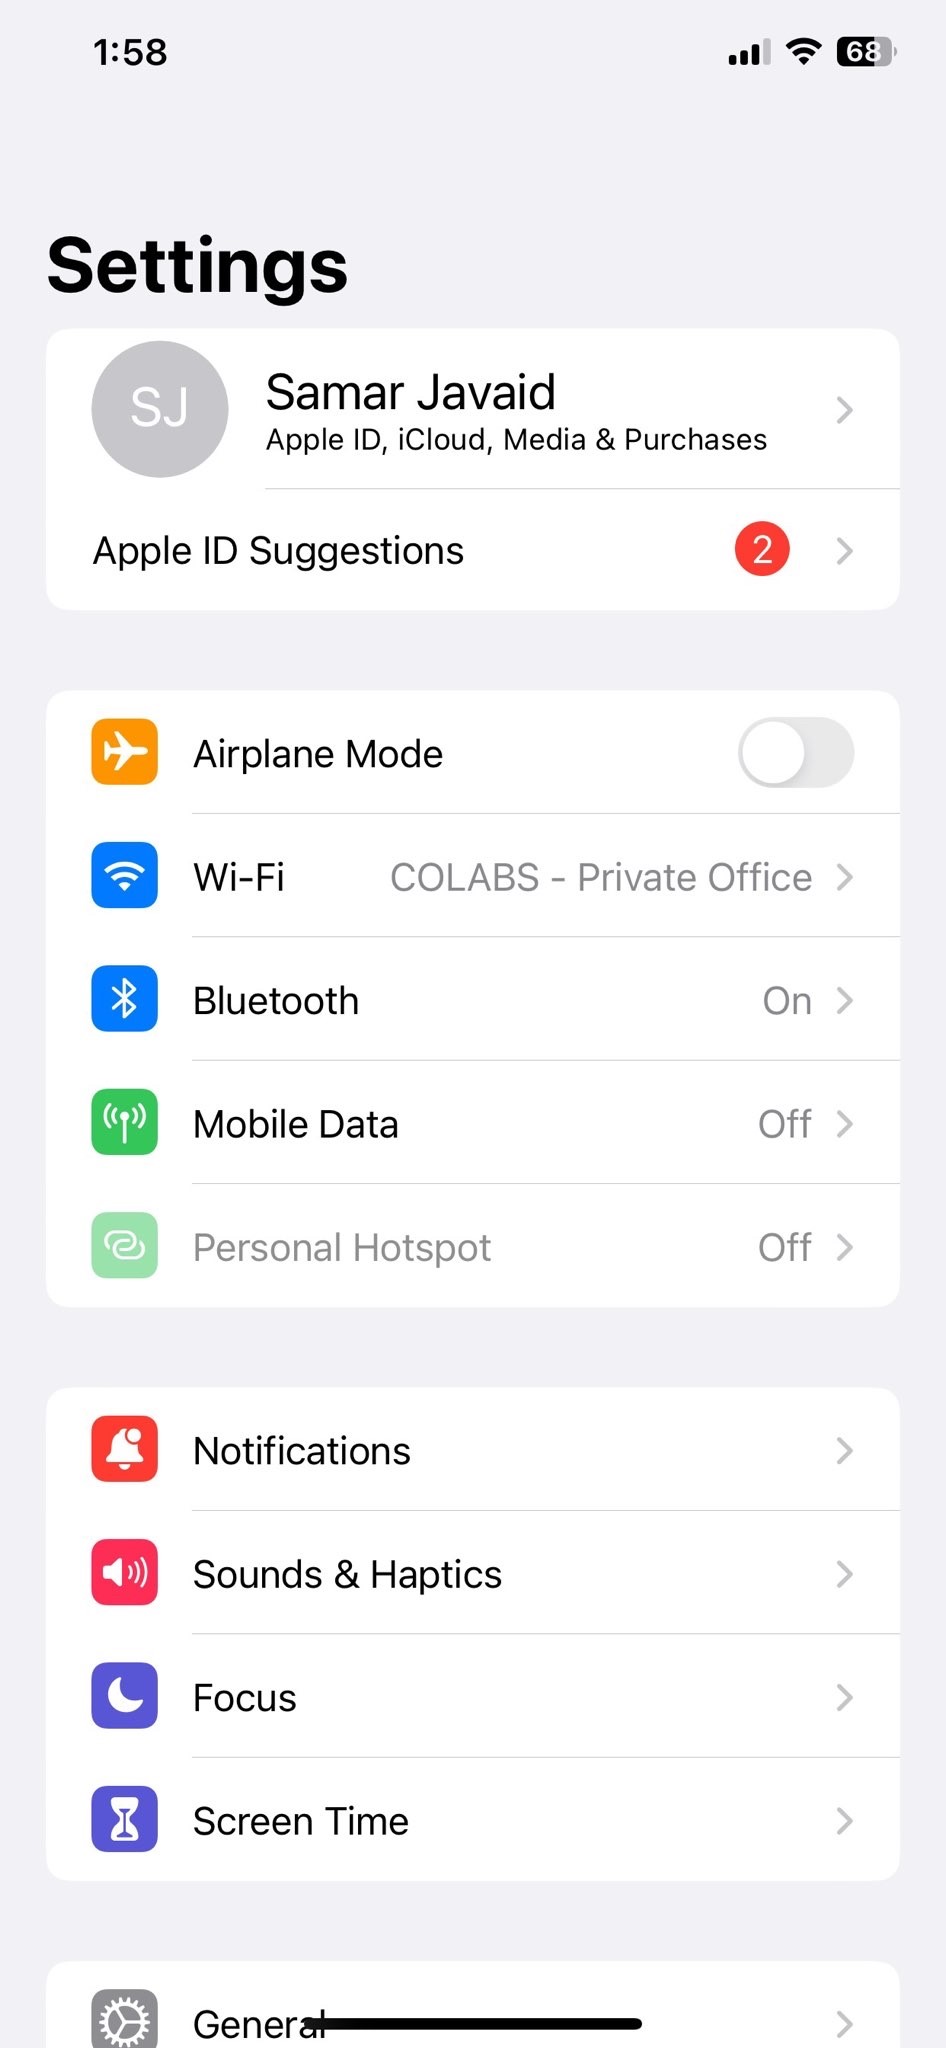 First, open the Settings app on your device